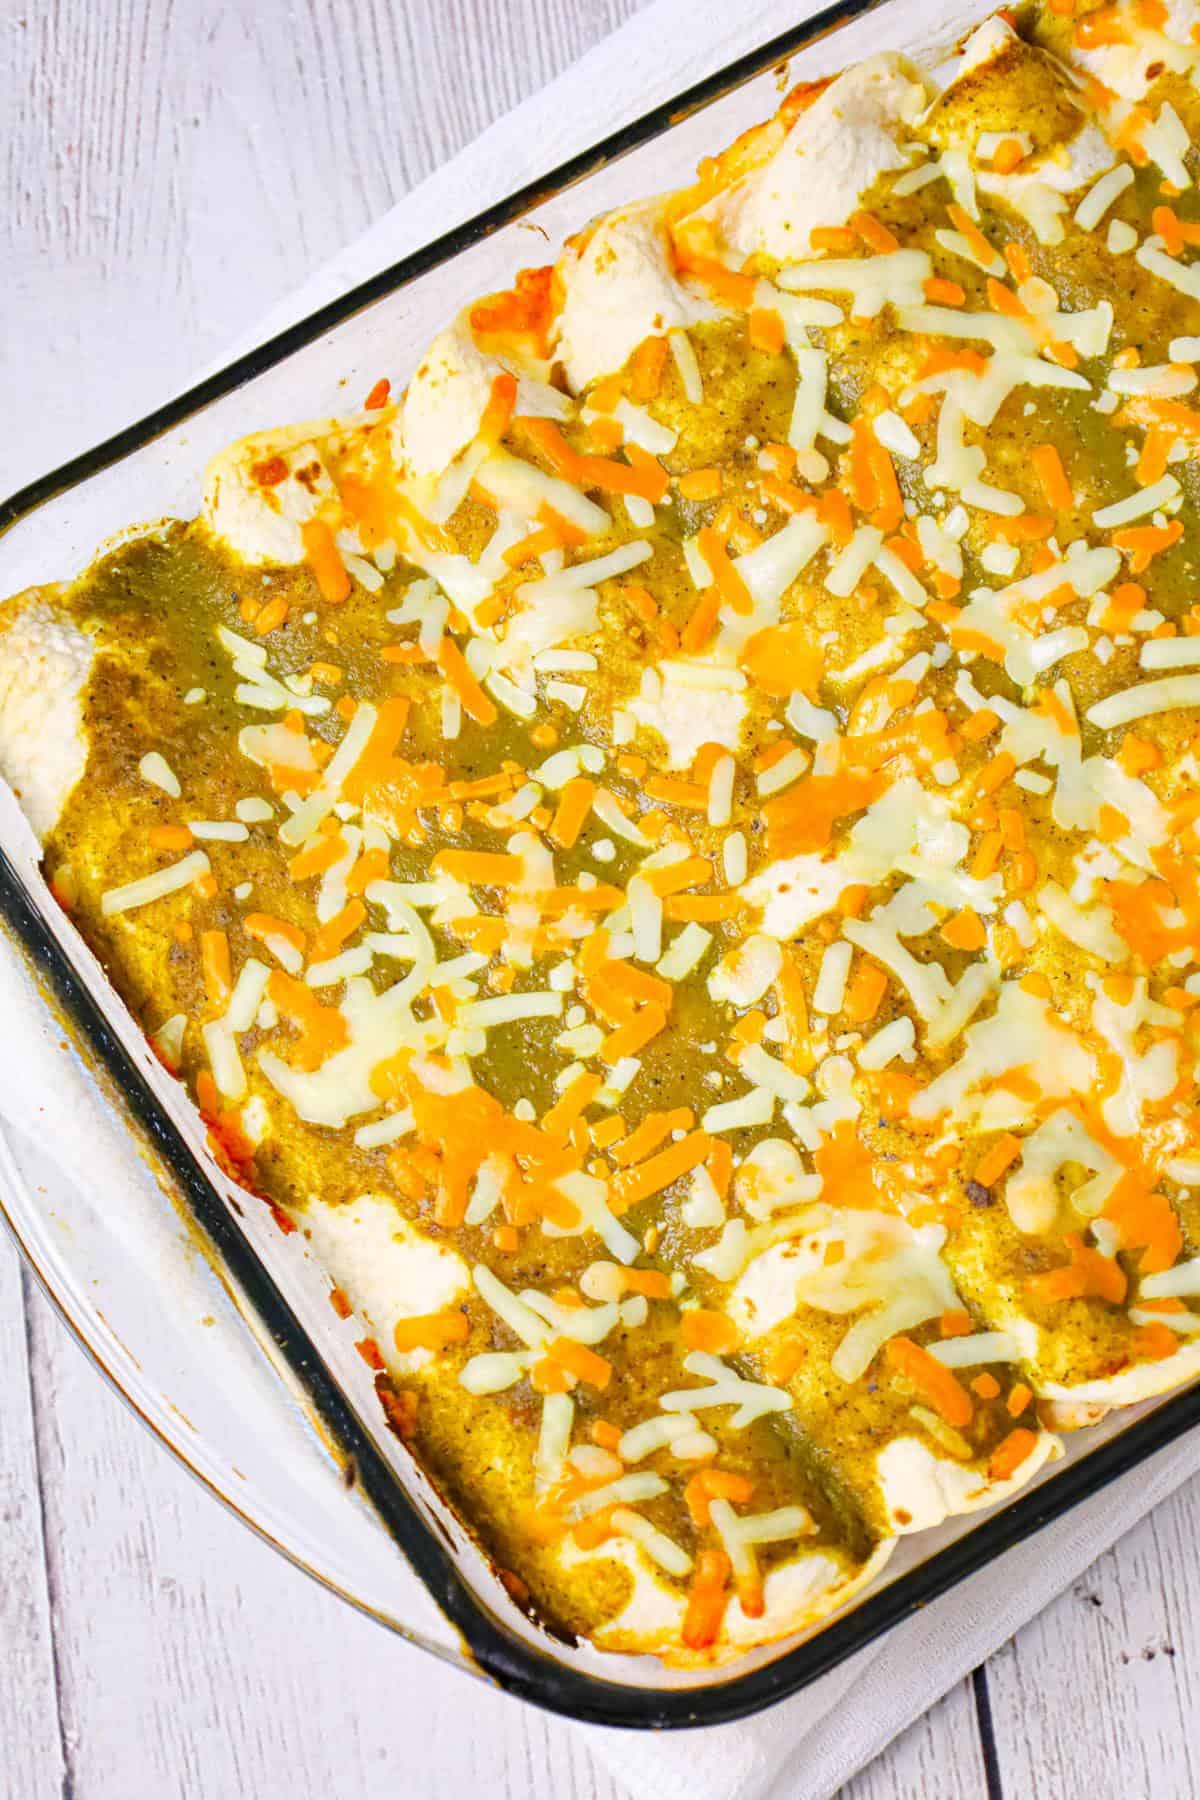 Cream Cheese Chicken Enchiladas are a delicious dinner recipe using shredded rotisserie chicken, sour cream, cream cheese, Rotel and shredded cheese all rolled inside flour tortillas and baked with green enchilada sauce.